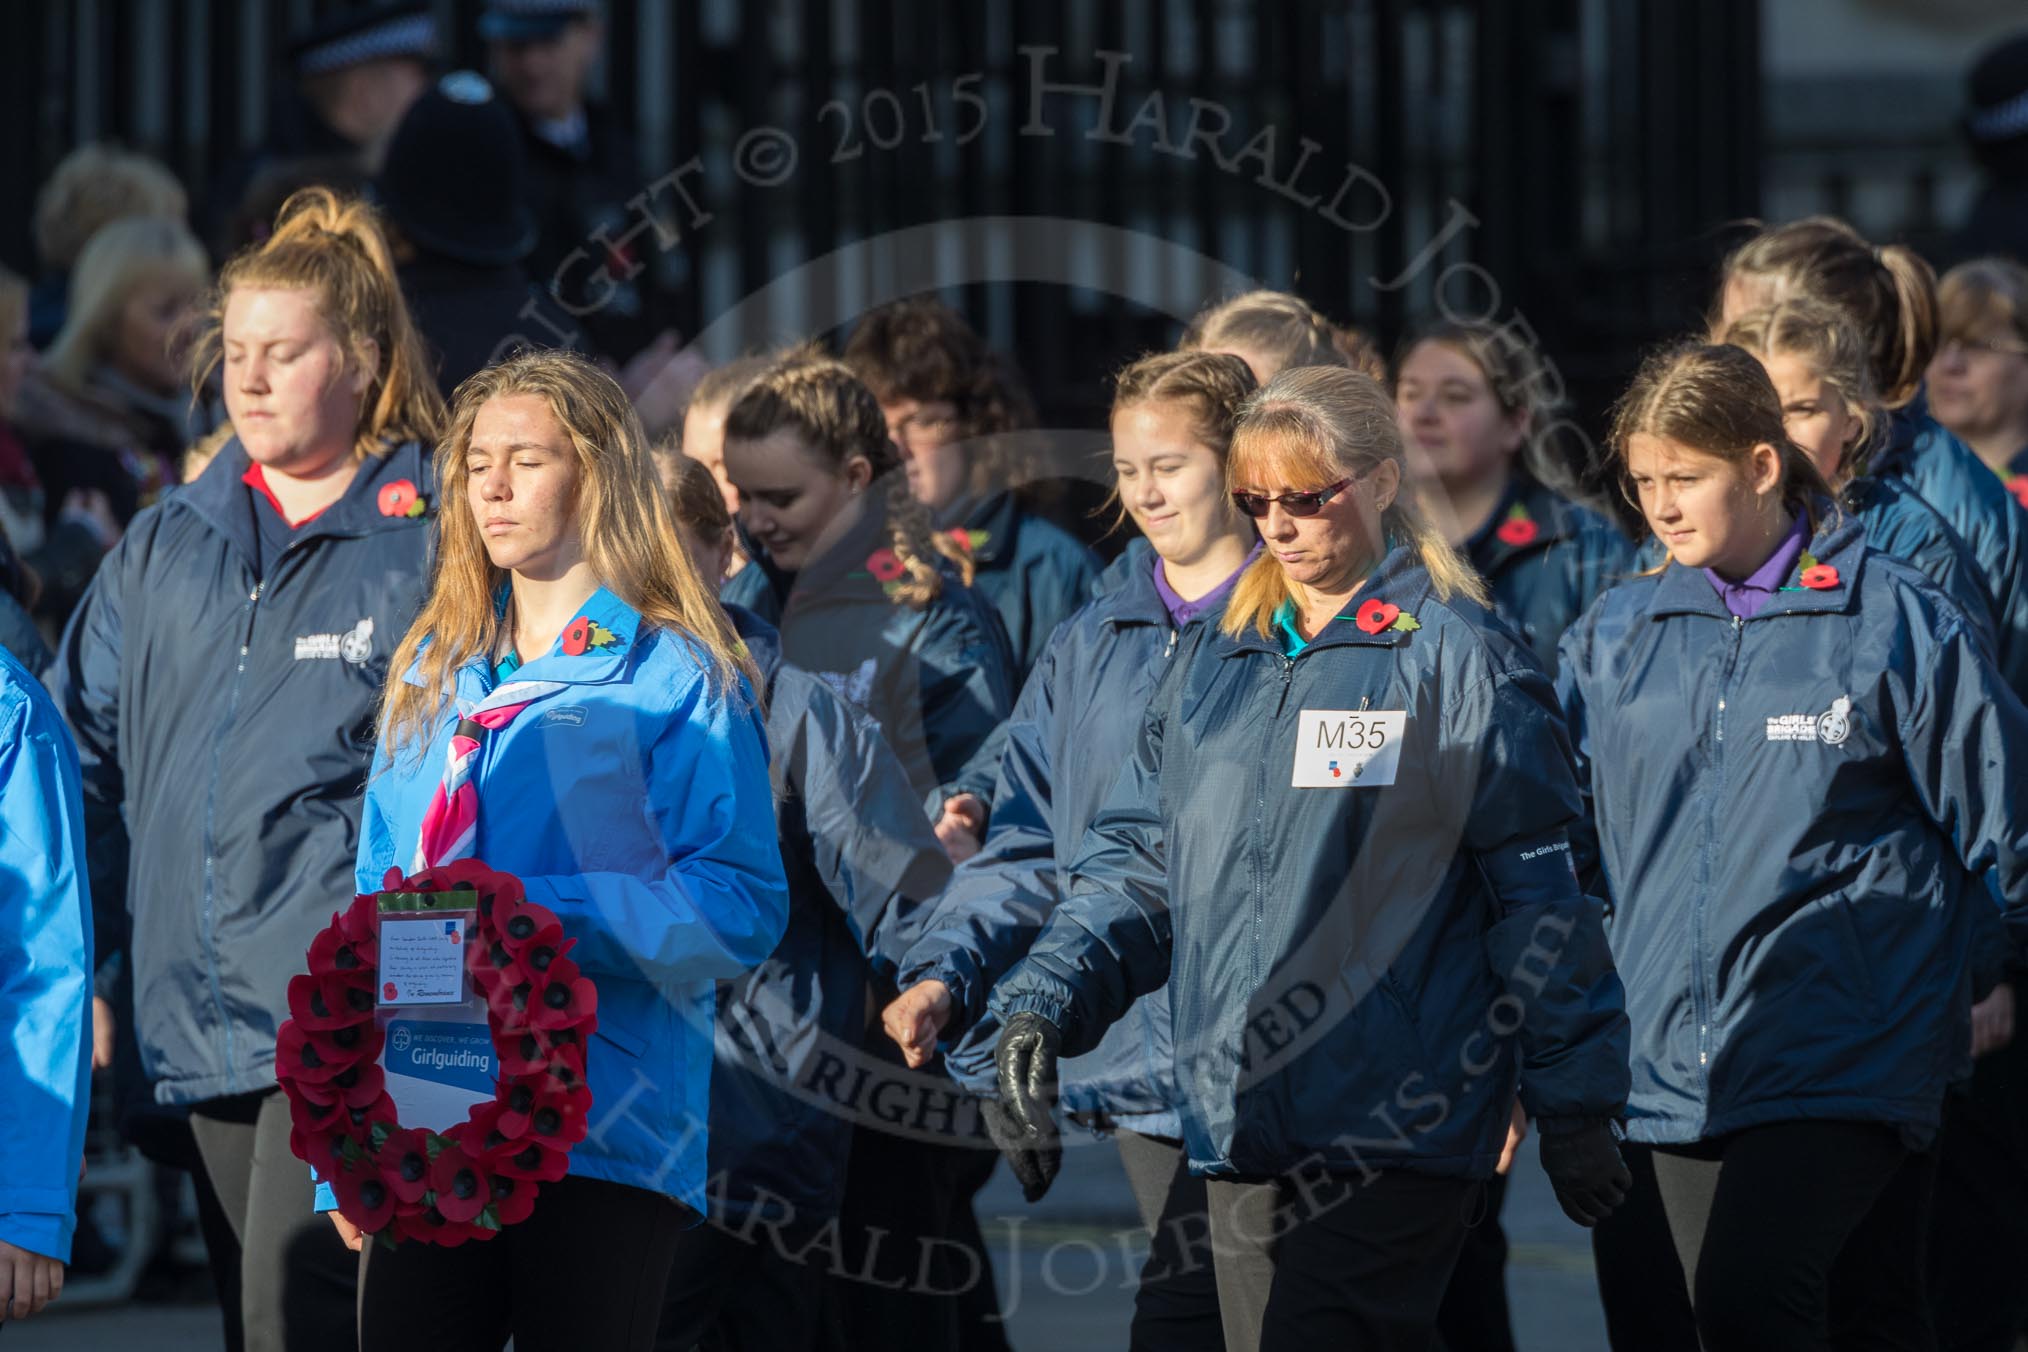 March Past, Remembrance Sunday at the Cenotaph 2016: M35 Girls Brigade England & Wales.
Cenotaph, Whitehall, London SW1,
London,
Greater London,
United Kingdom,
on 13 November 2016 at 13:18, image #2866